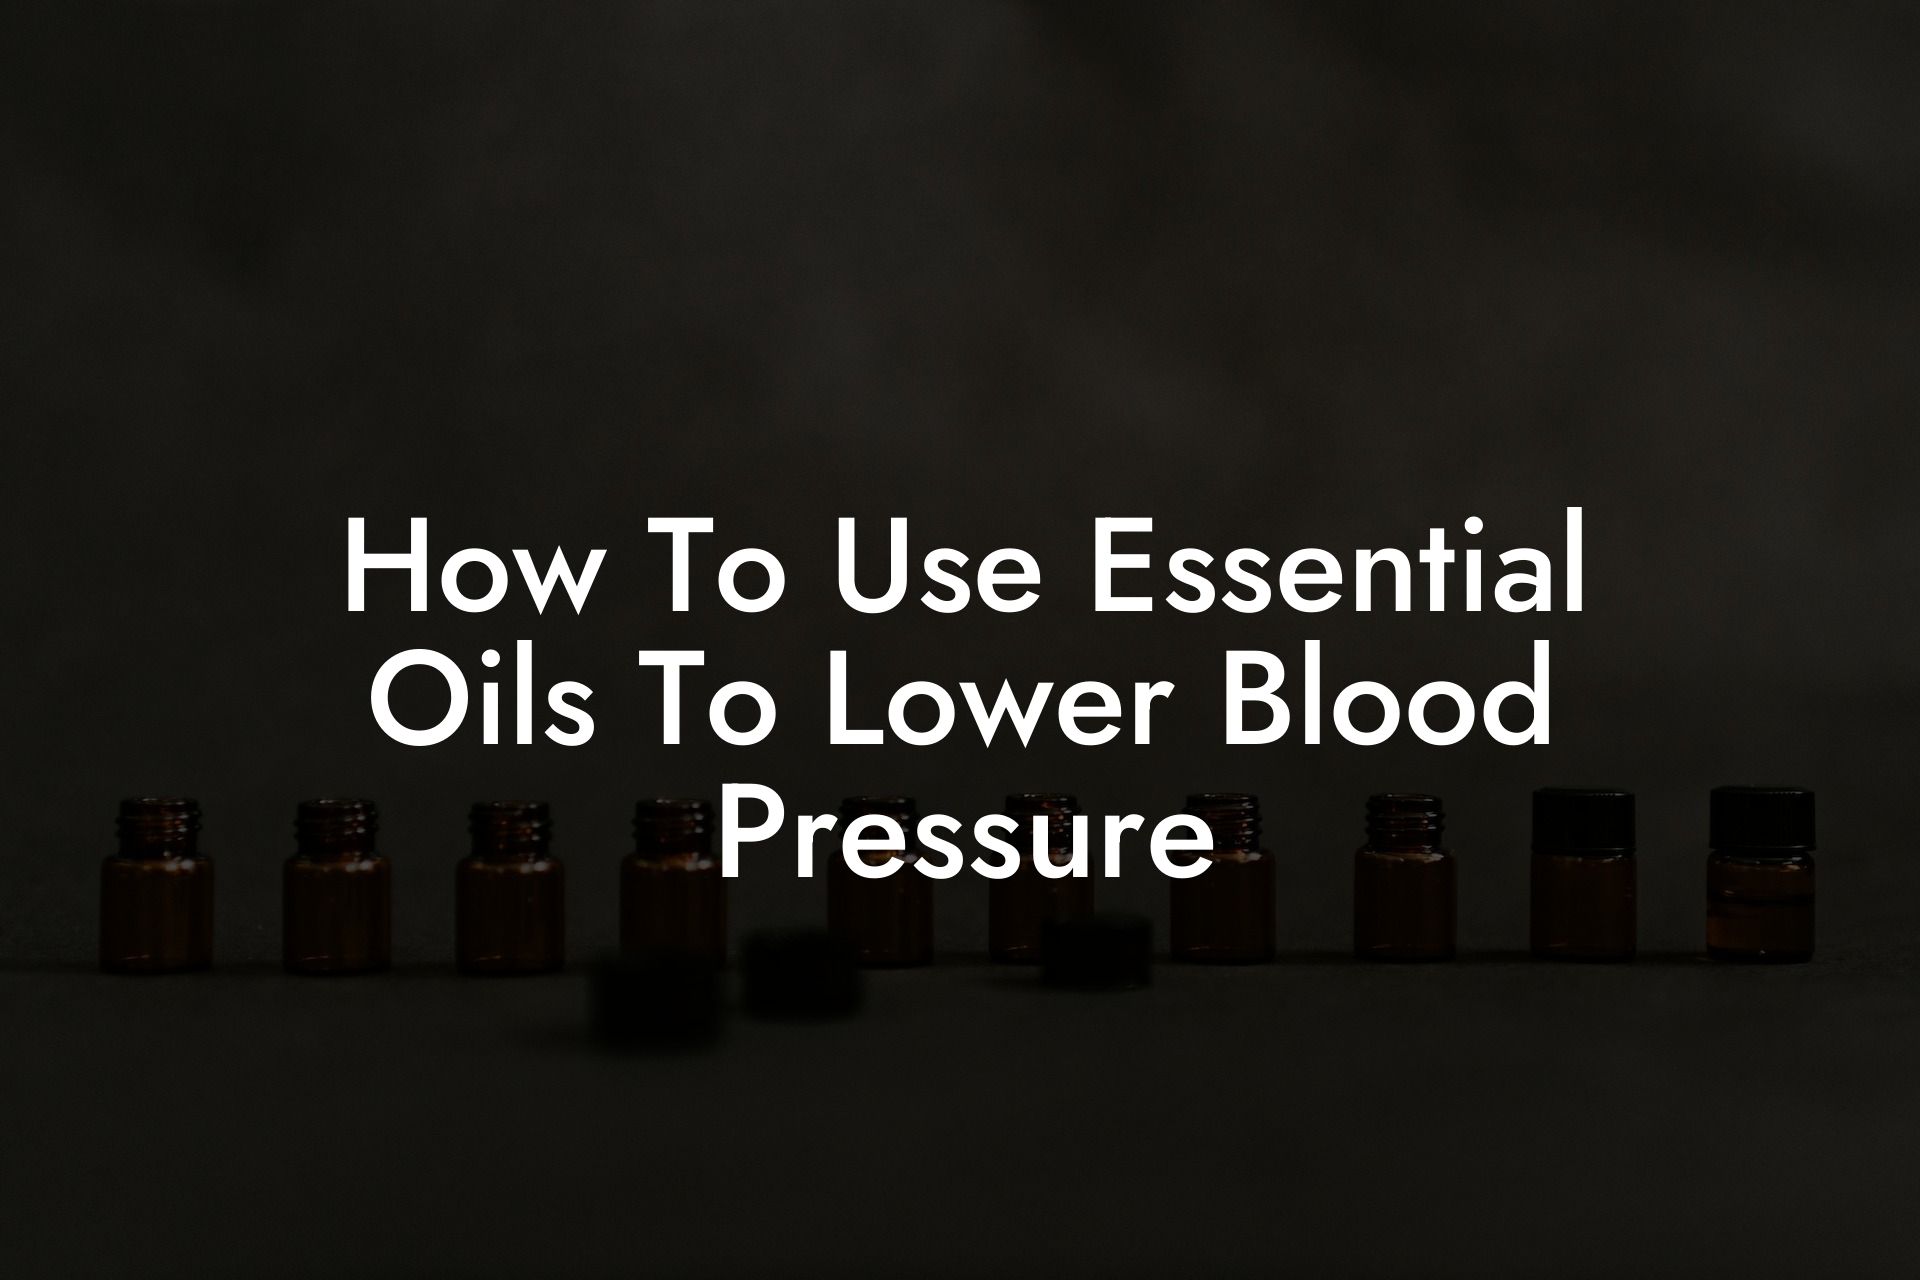 How To Use Essential Oils To Lower Blood Pressure